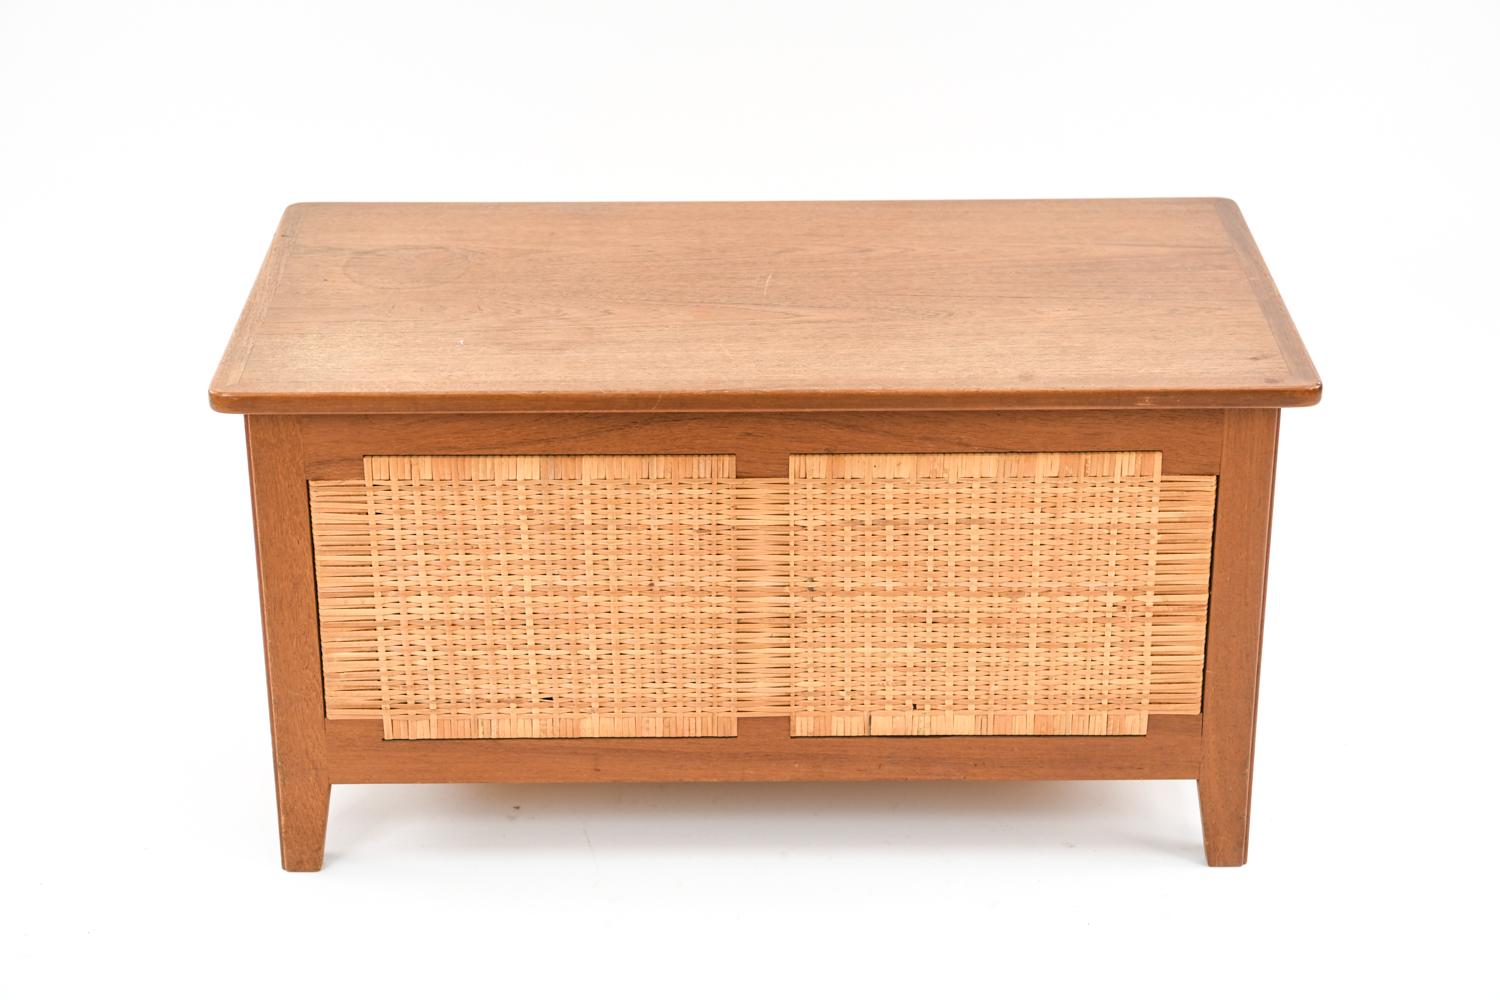 A beautiful Danish midcentury blanket chest in teak and cane, designed by Kaj Winding for Poul Hundevad, circa 1960s. This piece is model PH52 and features a sturdy teak frame with woven cane sides. A great storage piece which could easily be